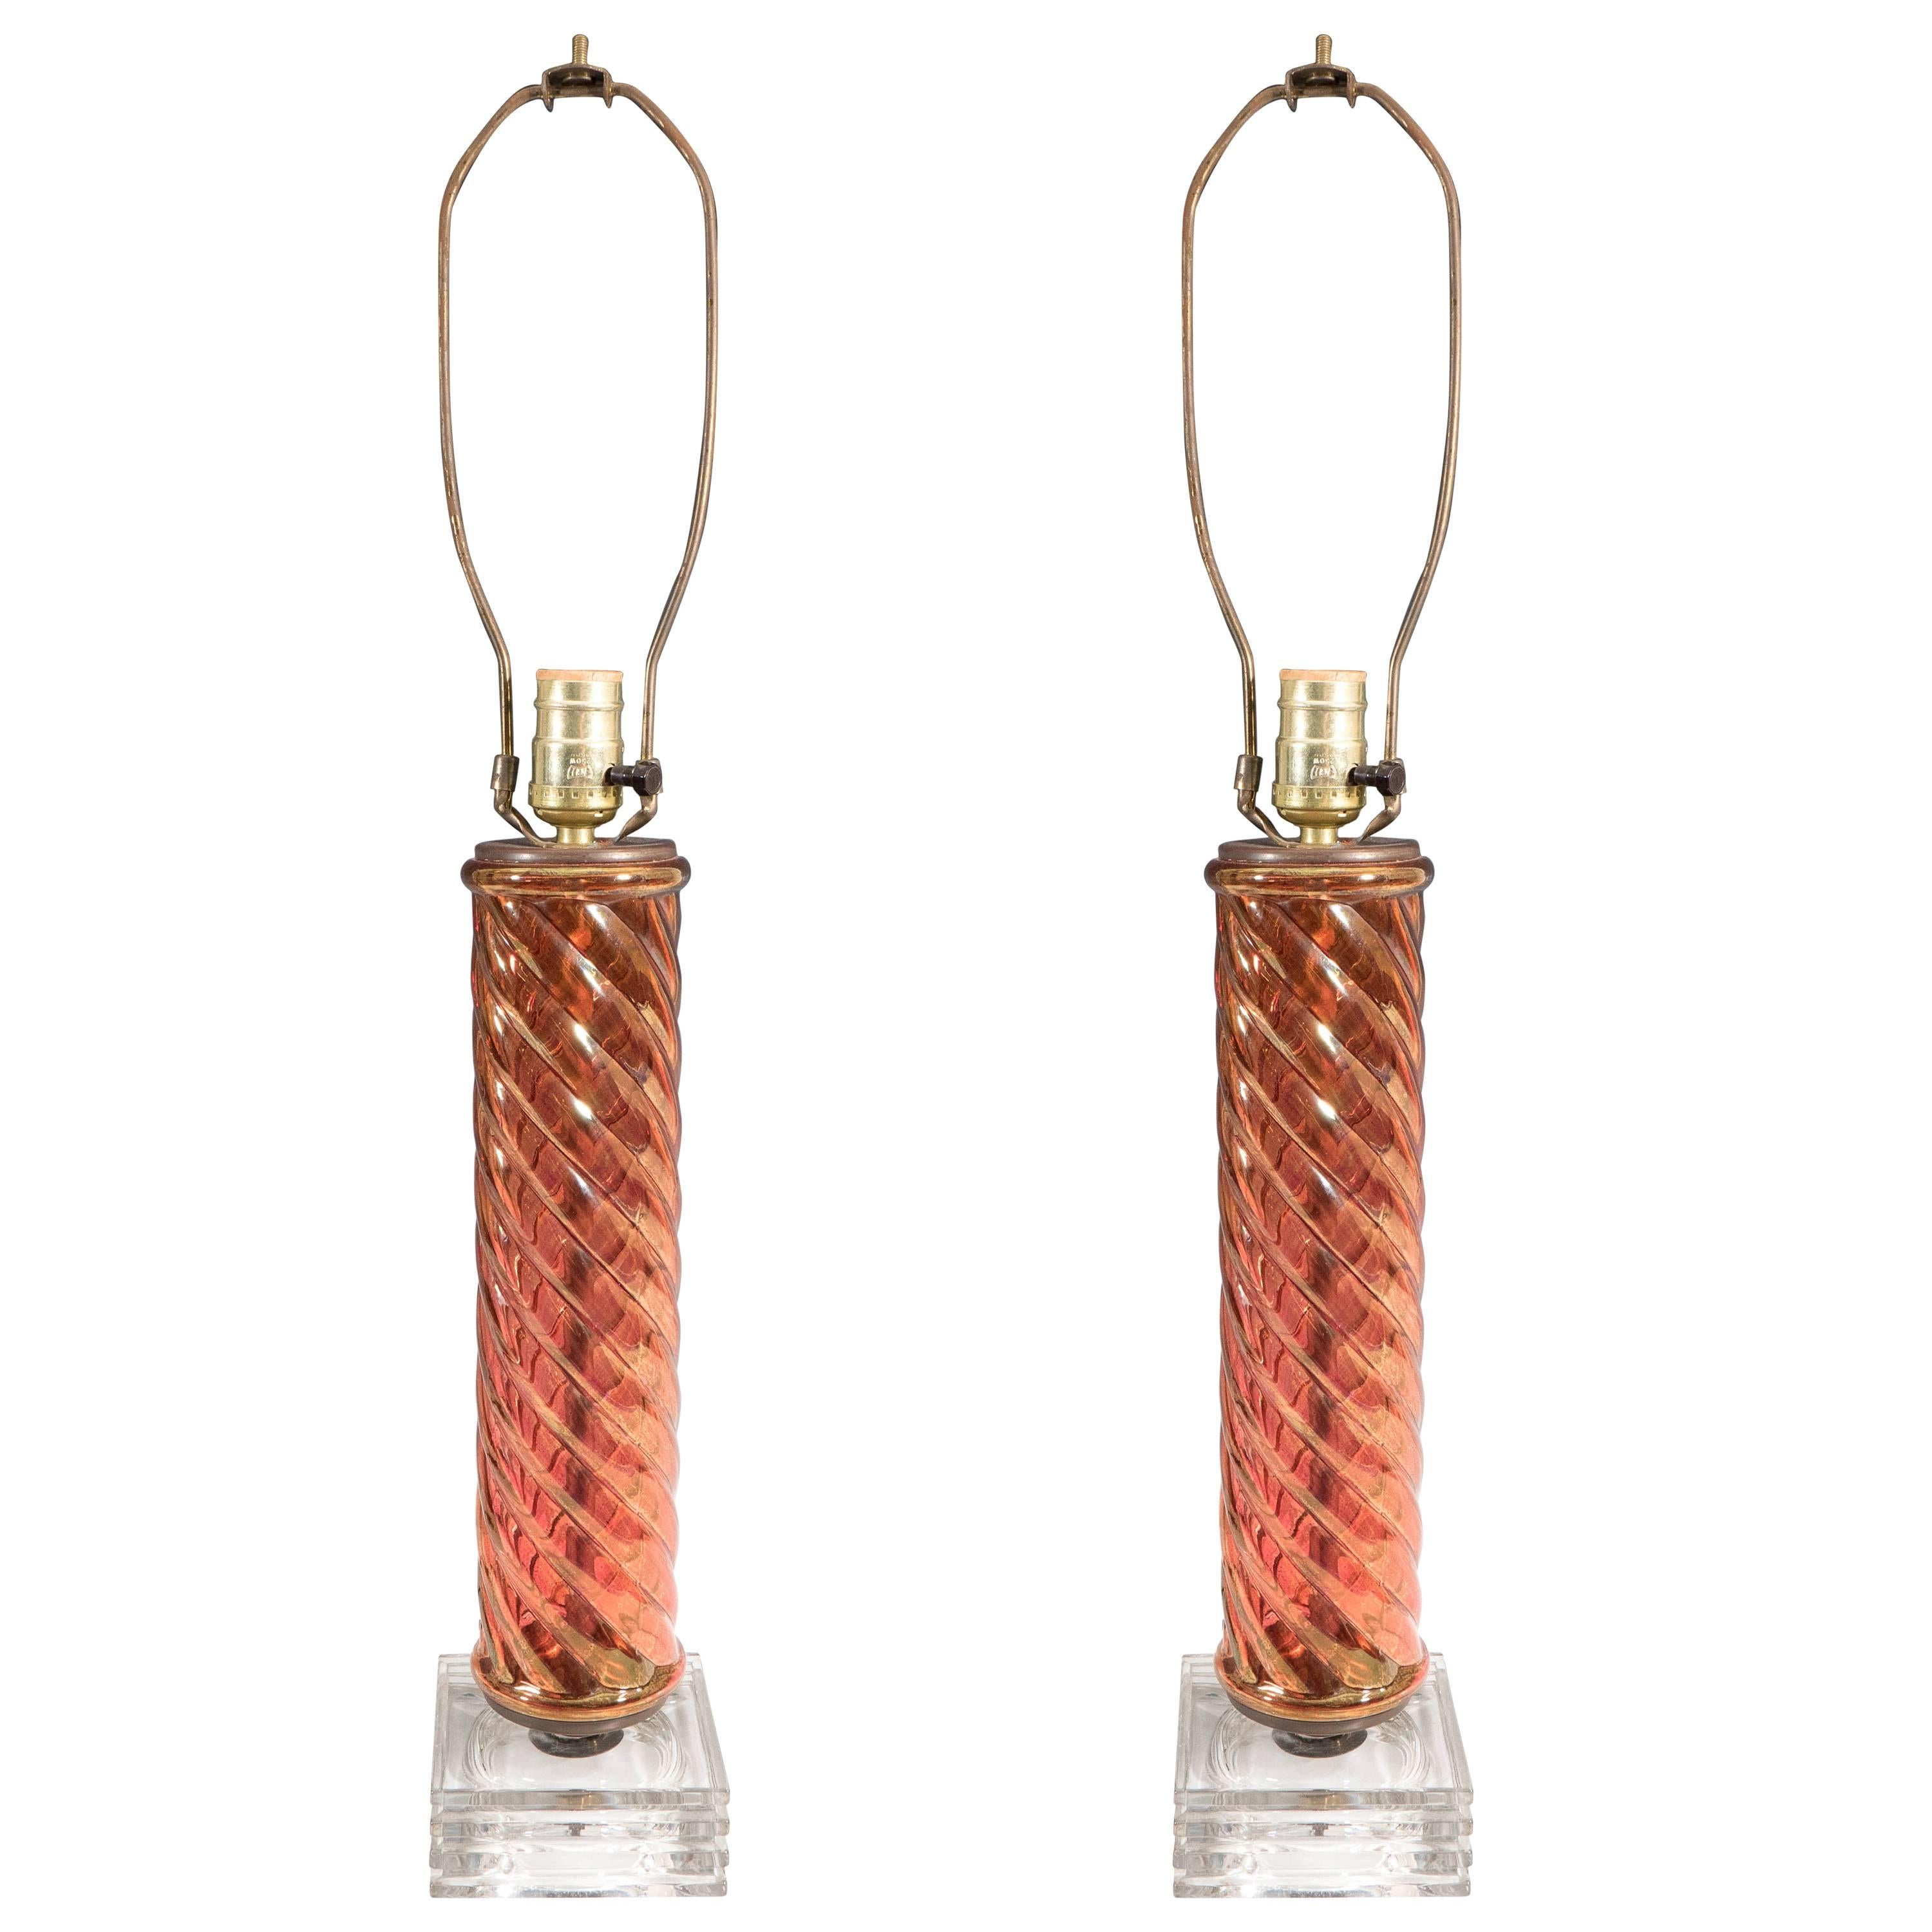 Pair of Glass Serpentine Column Lamps in Iridescent Amber on Glass Bases